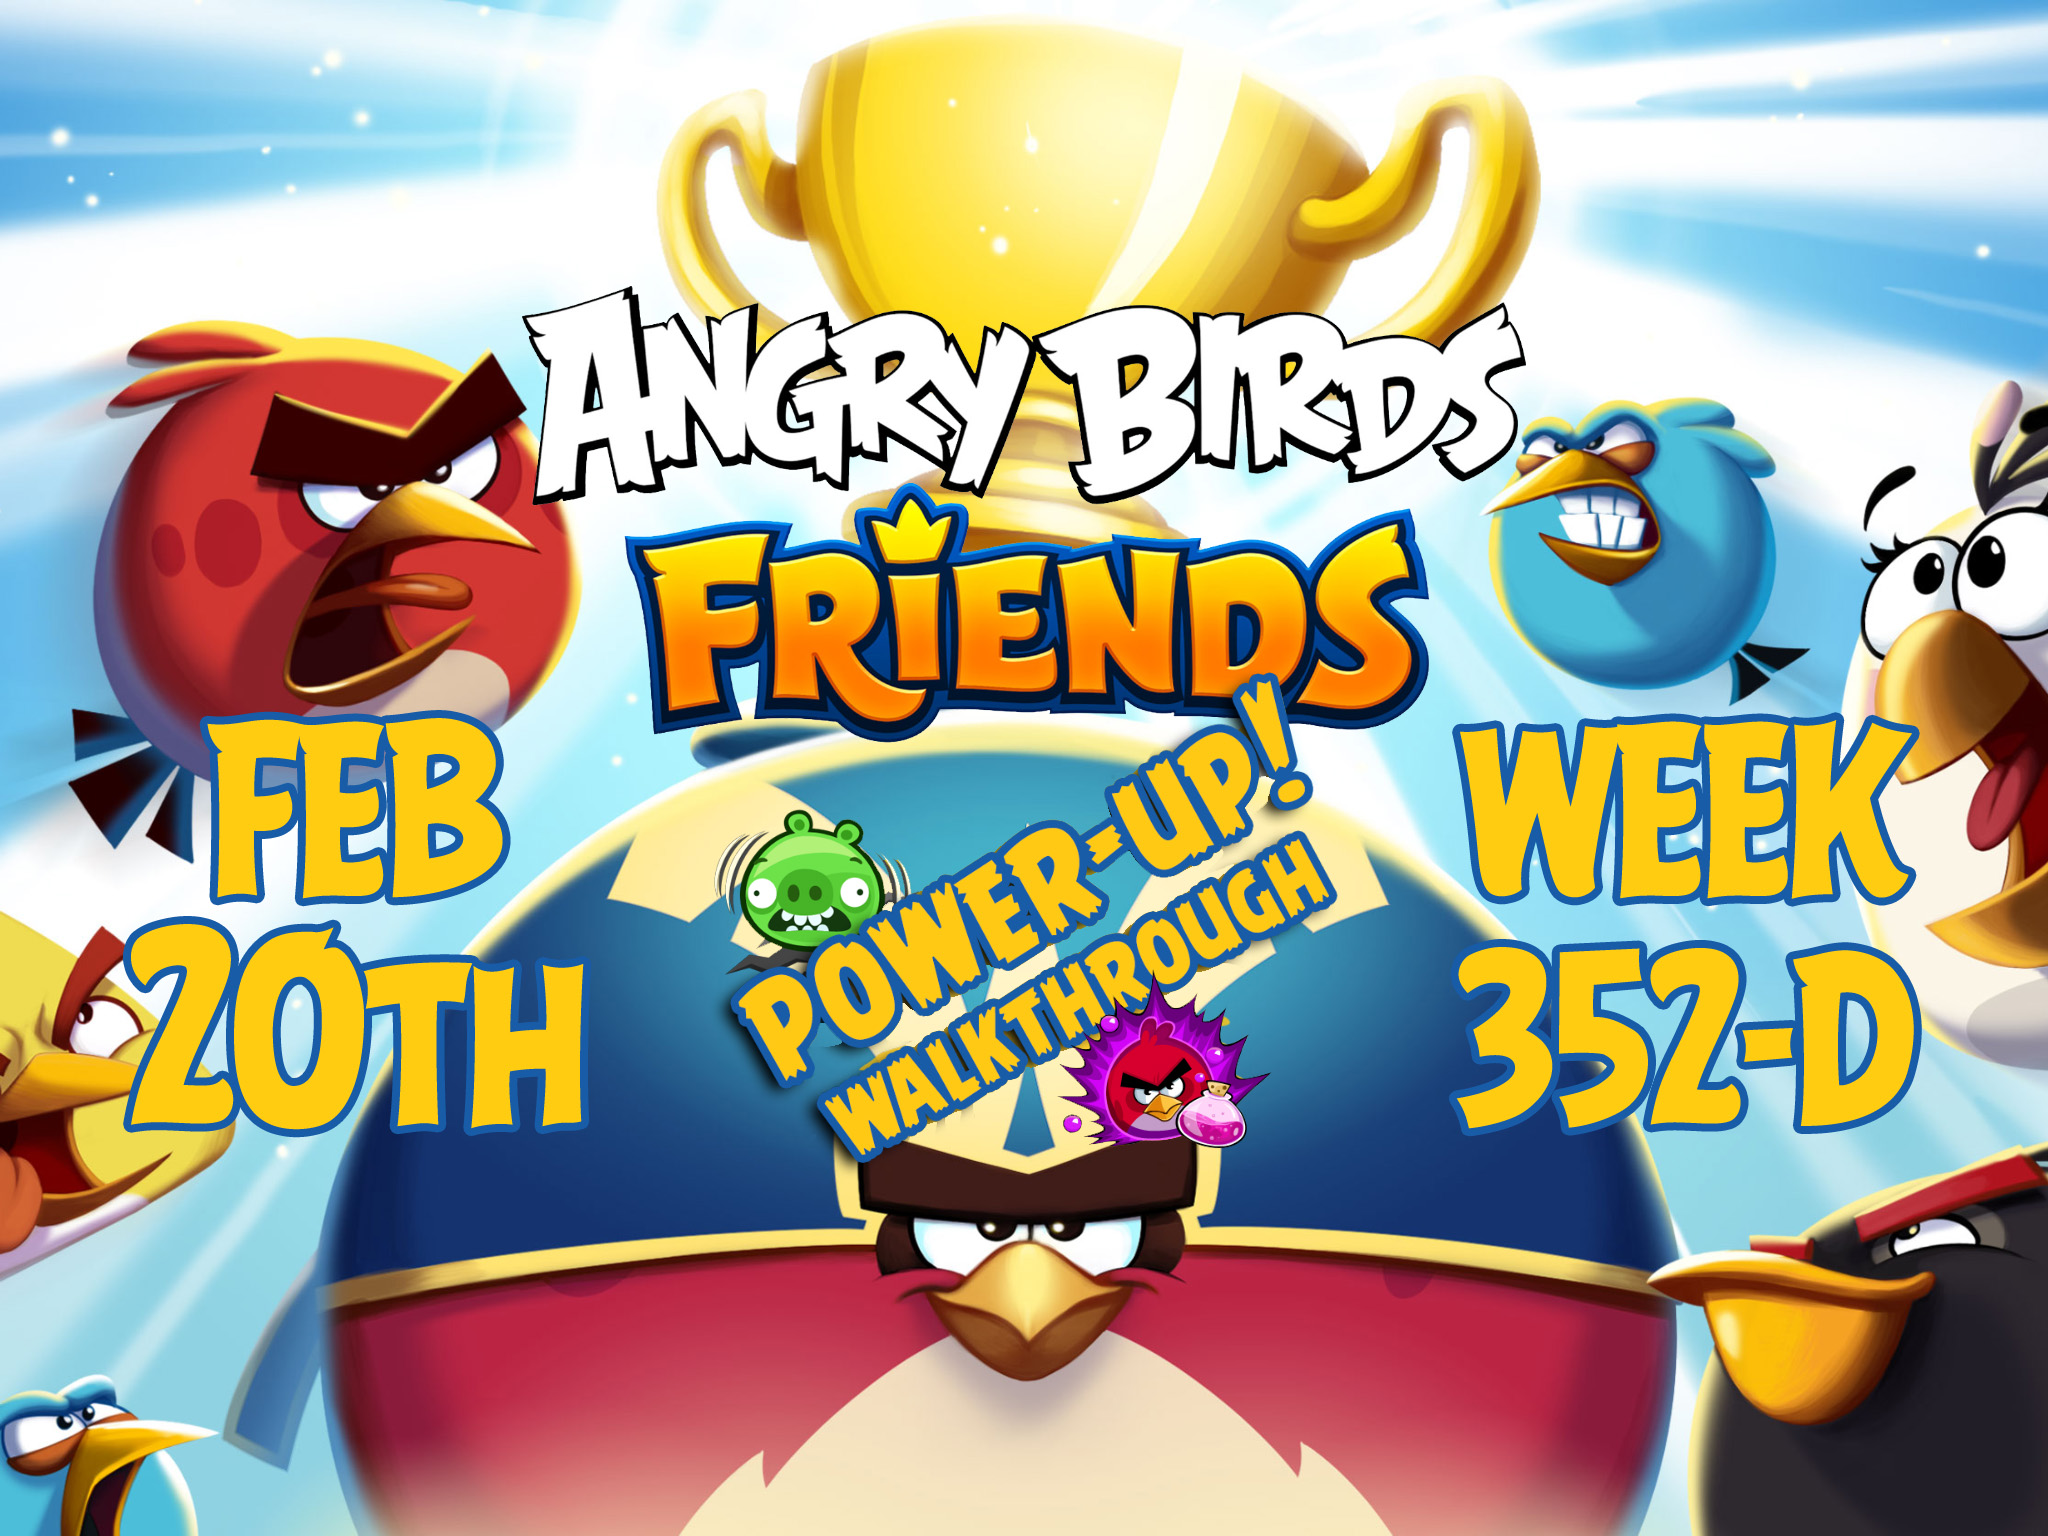 Angry-Birds-Friends-Tournament-Week-352-D-Feature-Image-PU